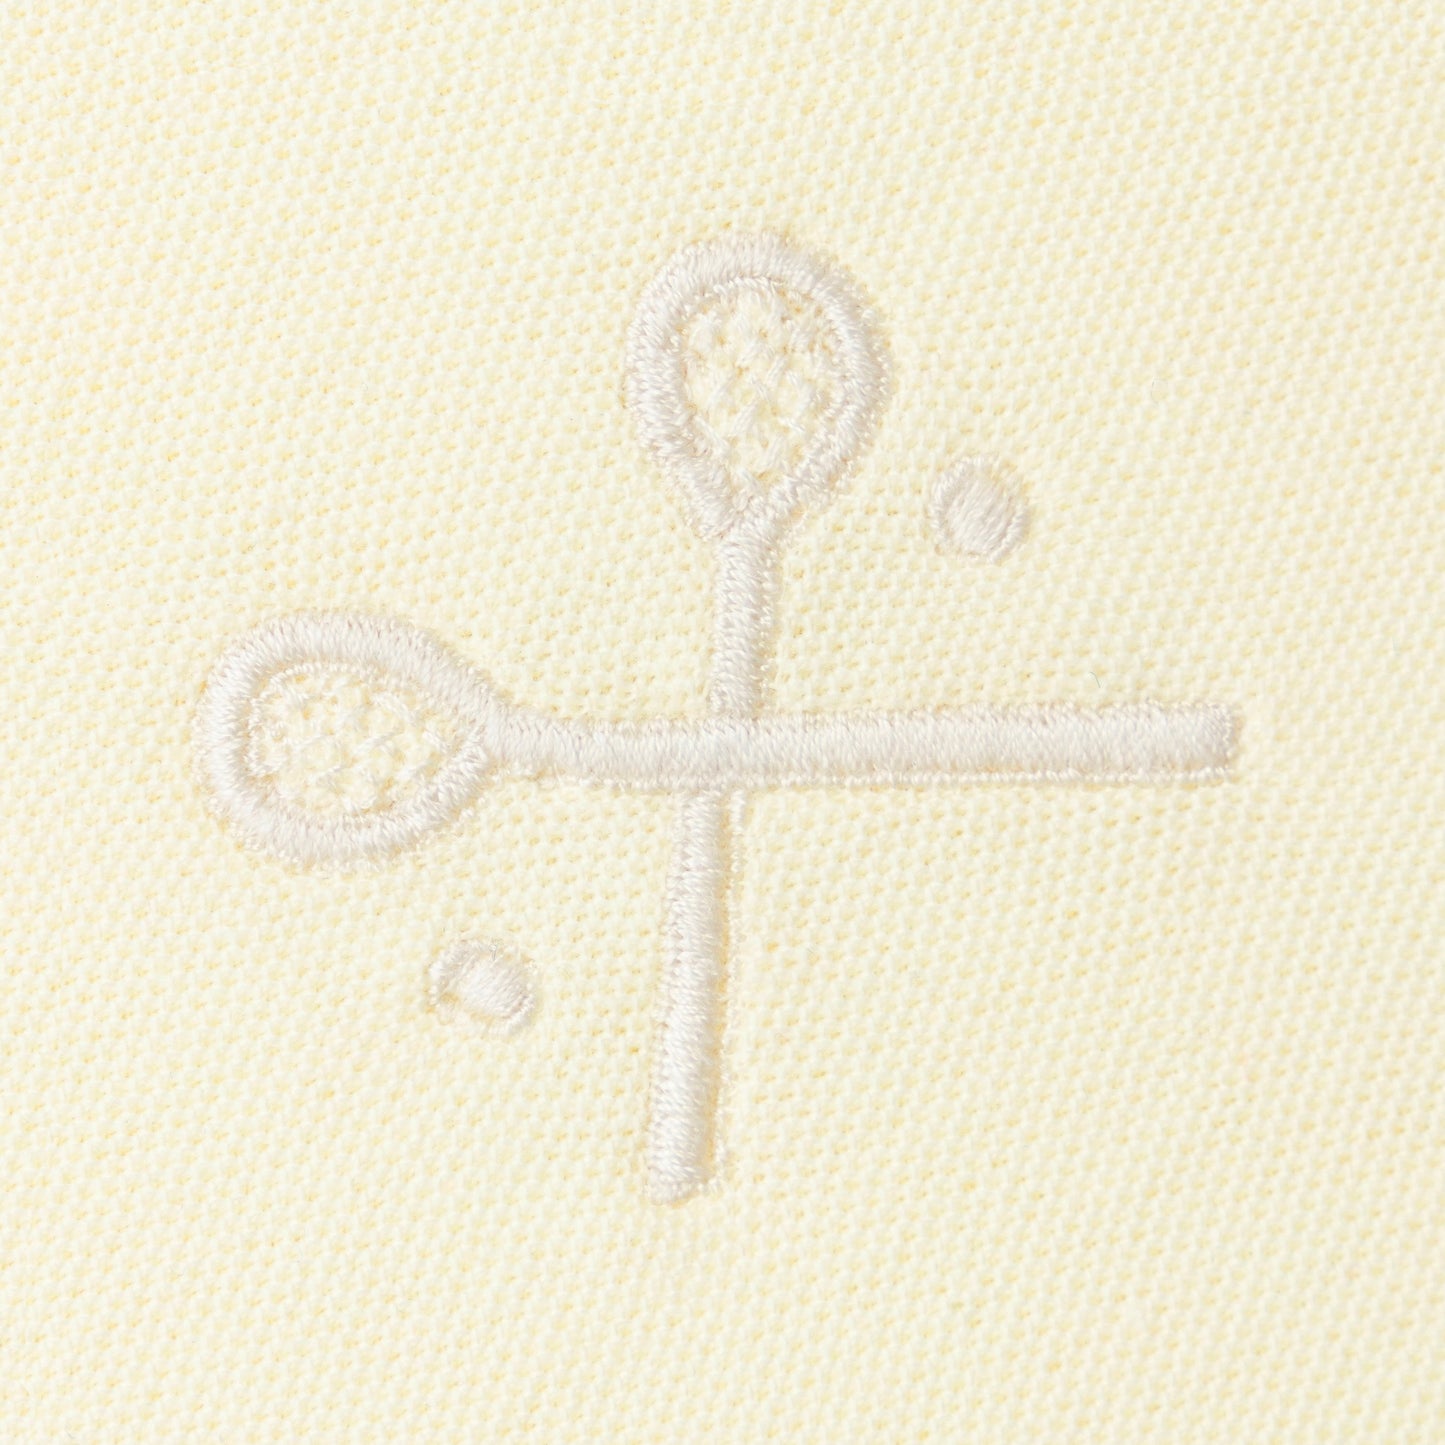 Yellow embroidered crossed racquets motif on yellow polo.